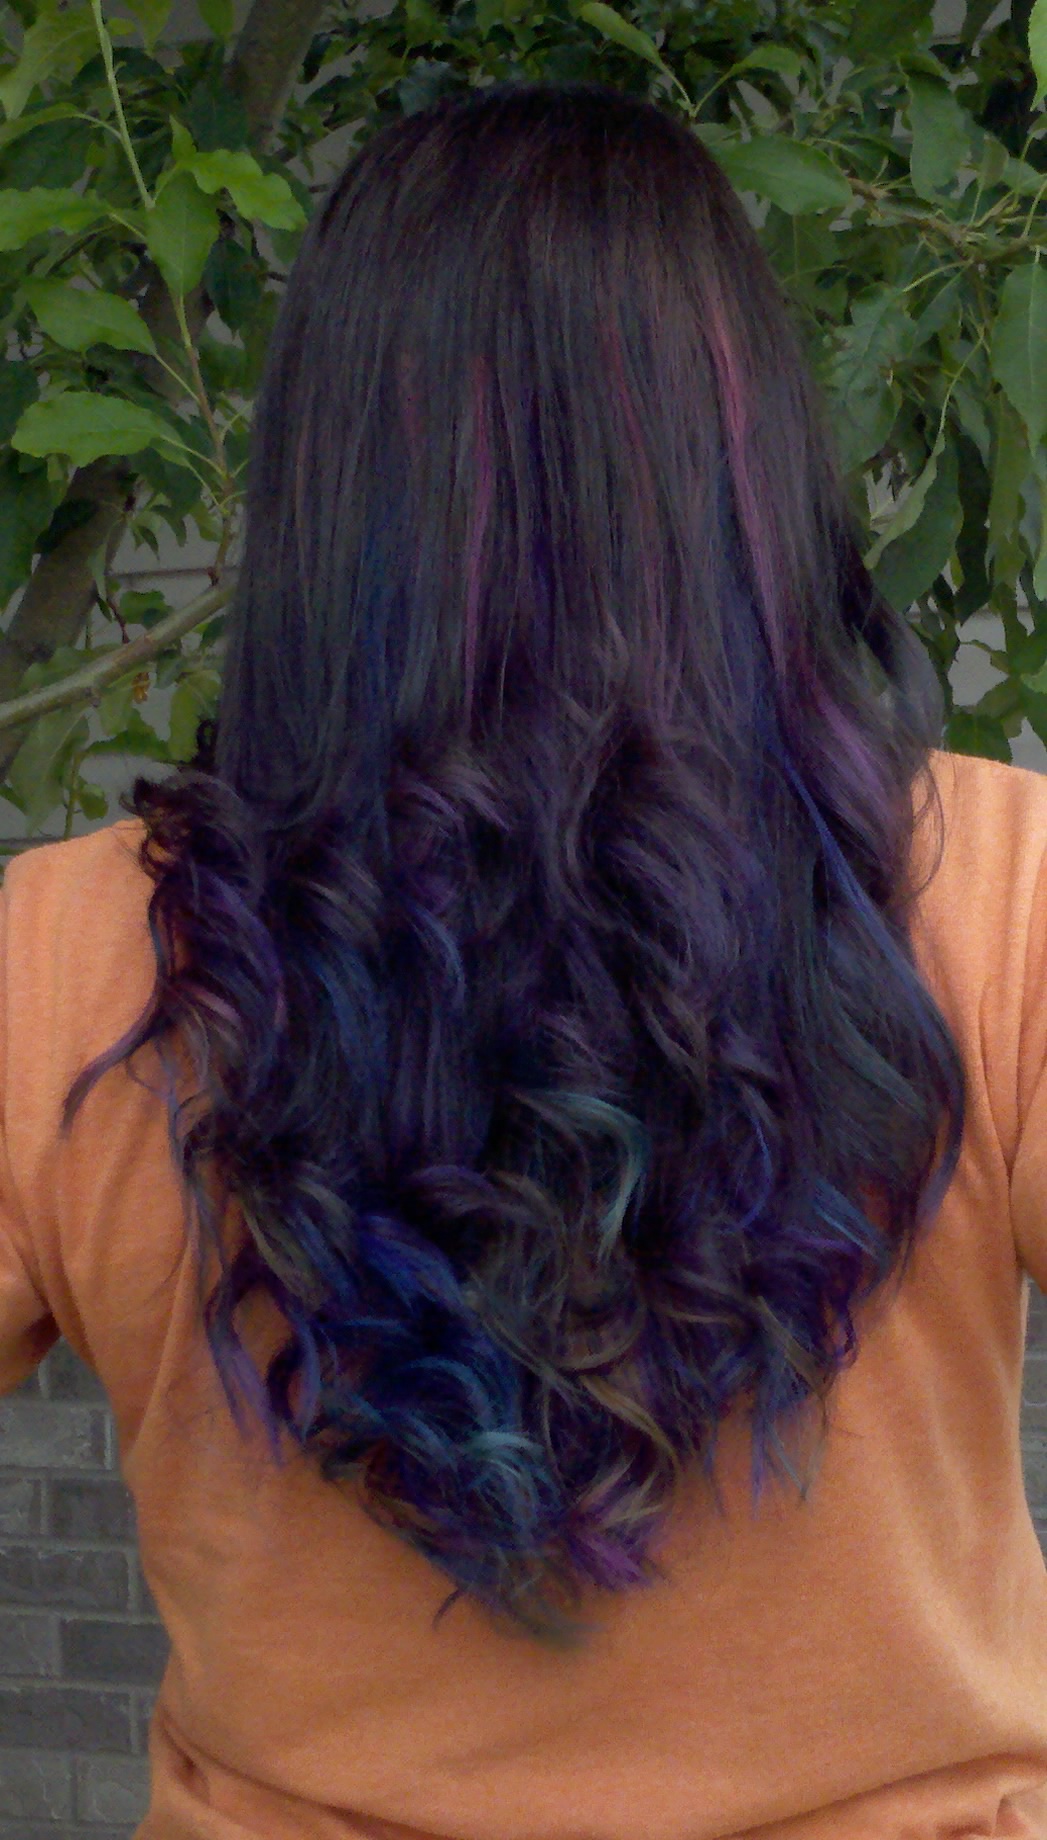 Blue and Brown Hair with Purple Highlights